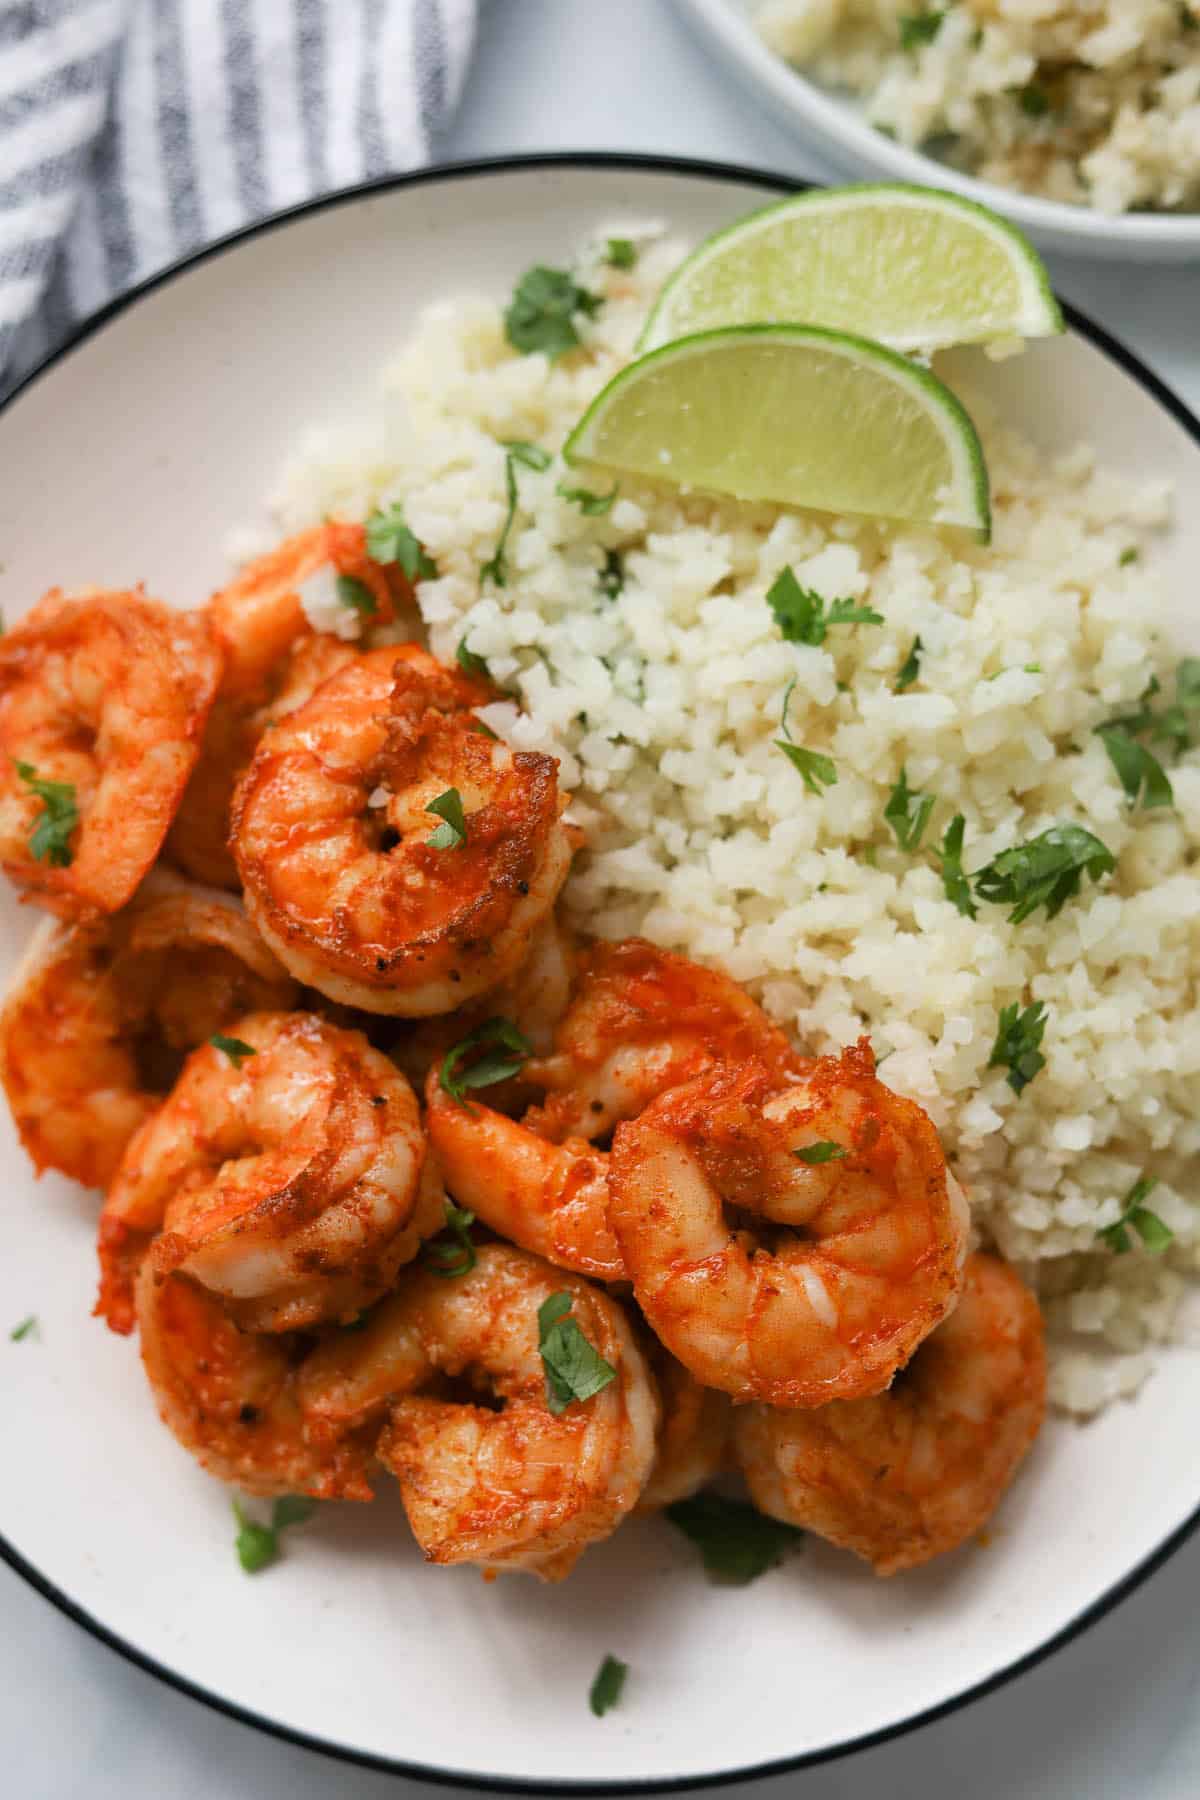 Cauliflower rice with jumbo shrimp, garnished with cilantro on a plate.